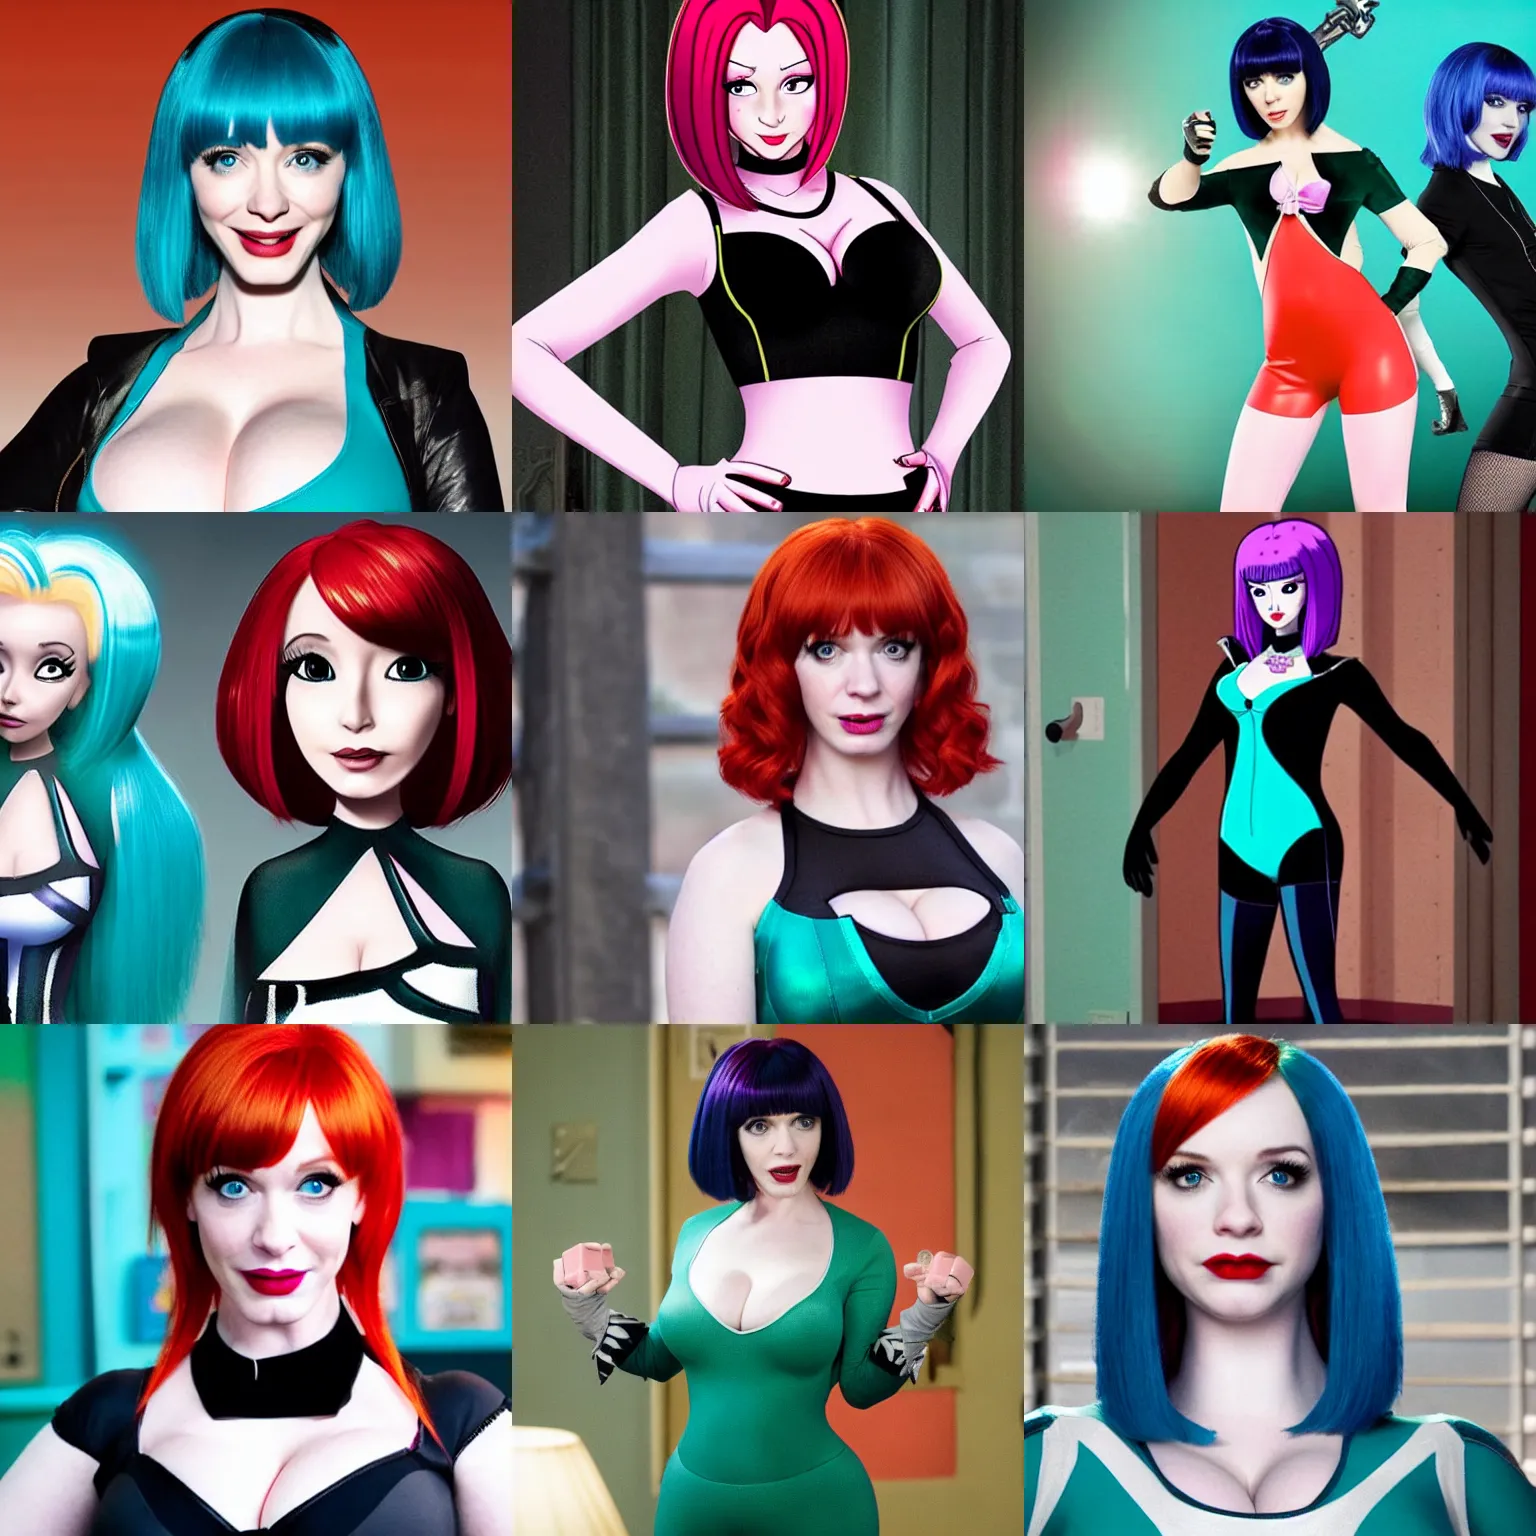 Prompt: christina hendricks as maddie fenton in the live - action netflix adaptation of danny phantom, promotional image ; she has auburn hair and a bob cut with straight bangs ; she is wearing a tight teal bodysuit with a black neck